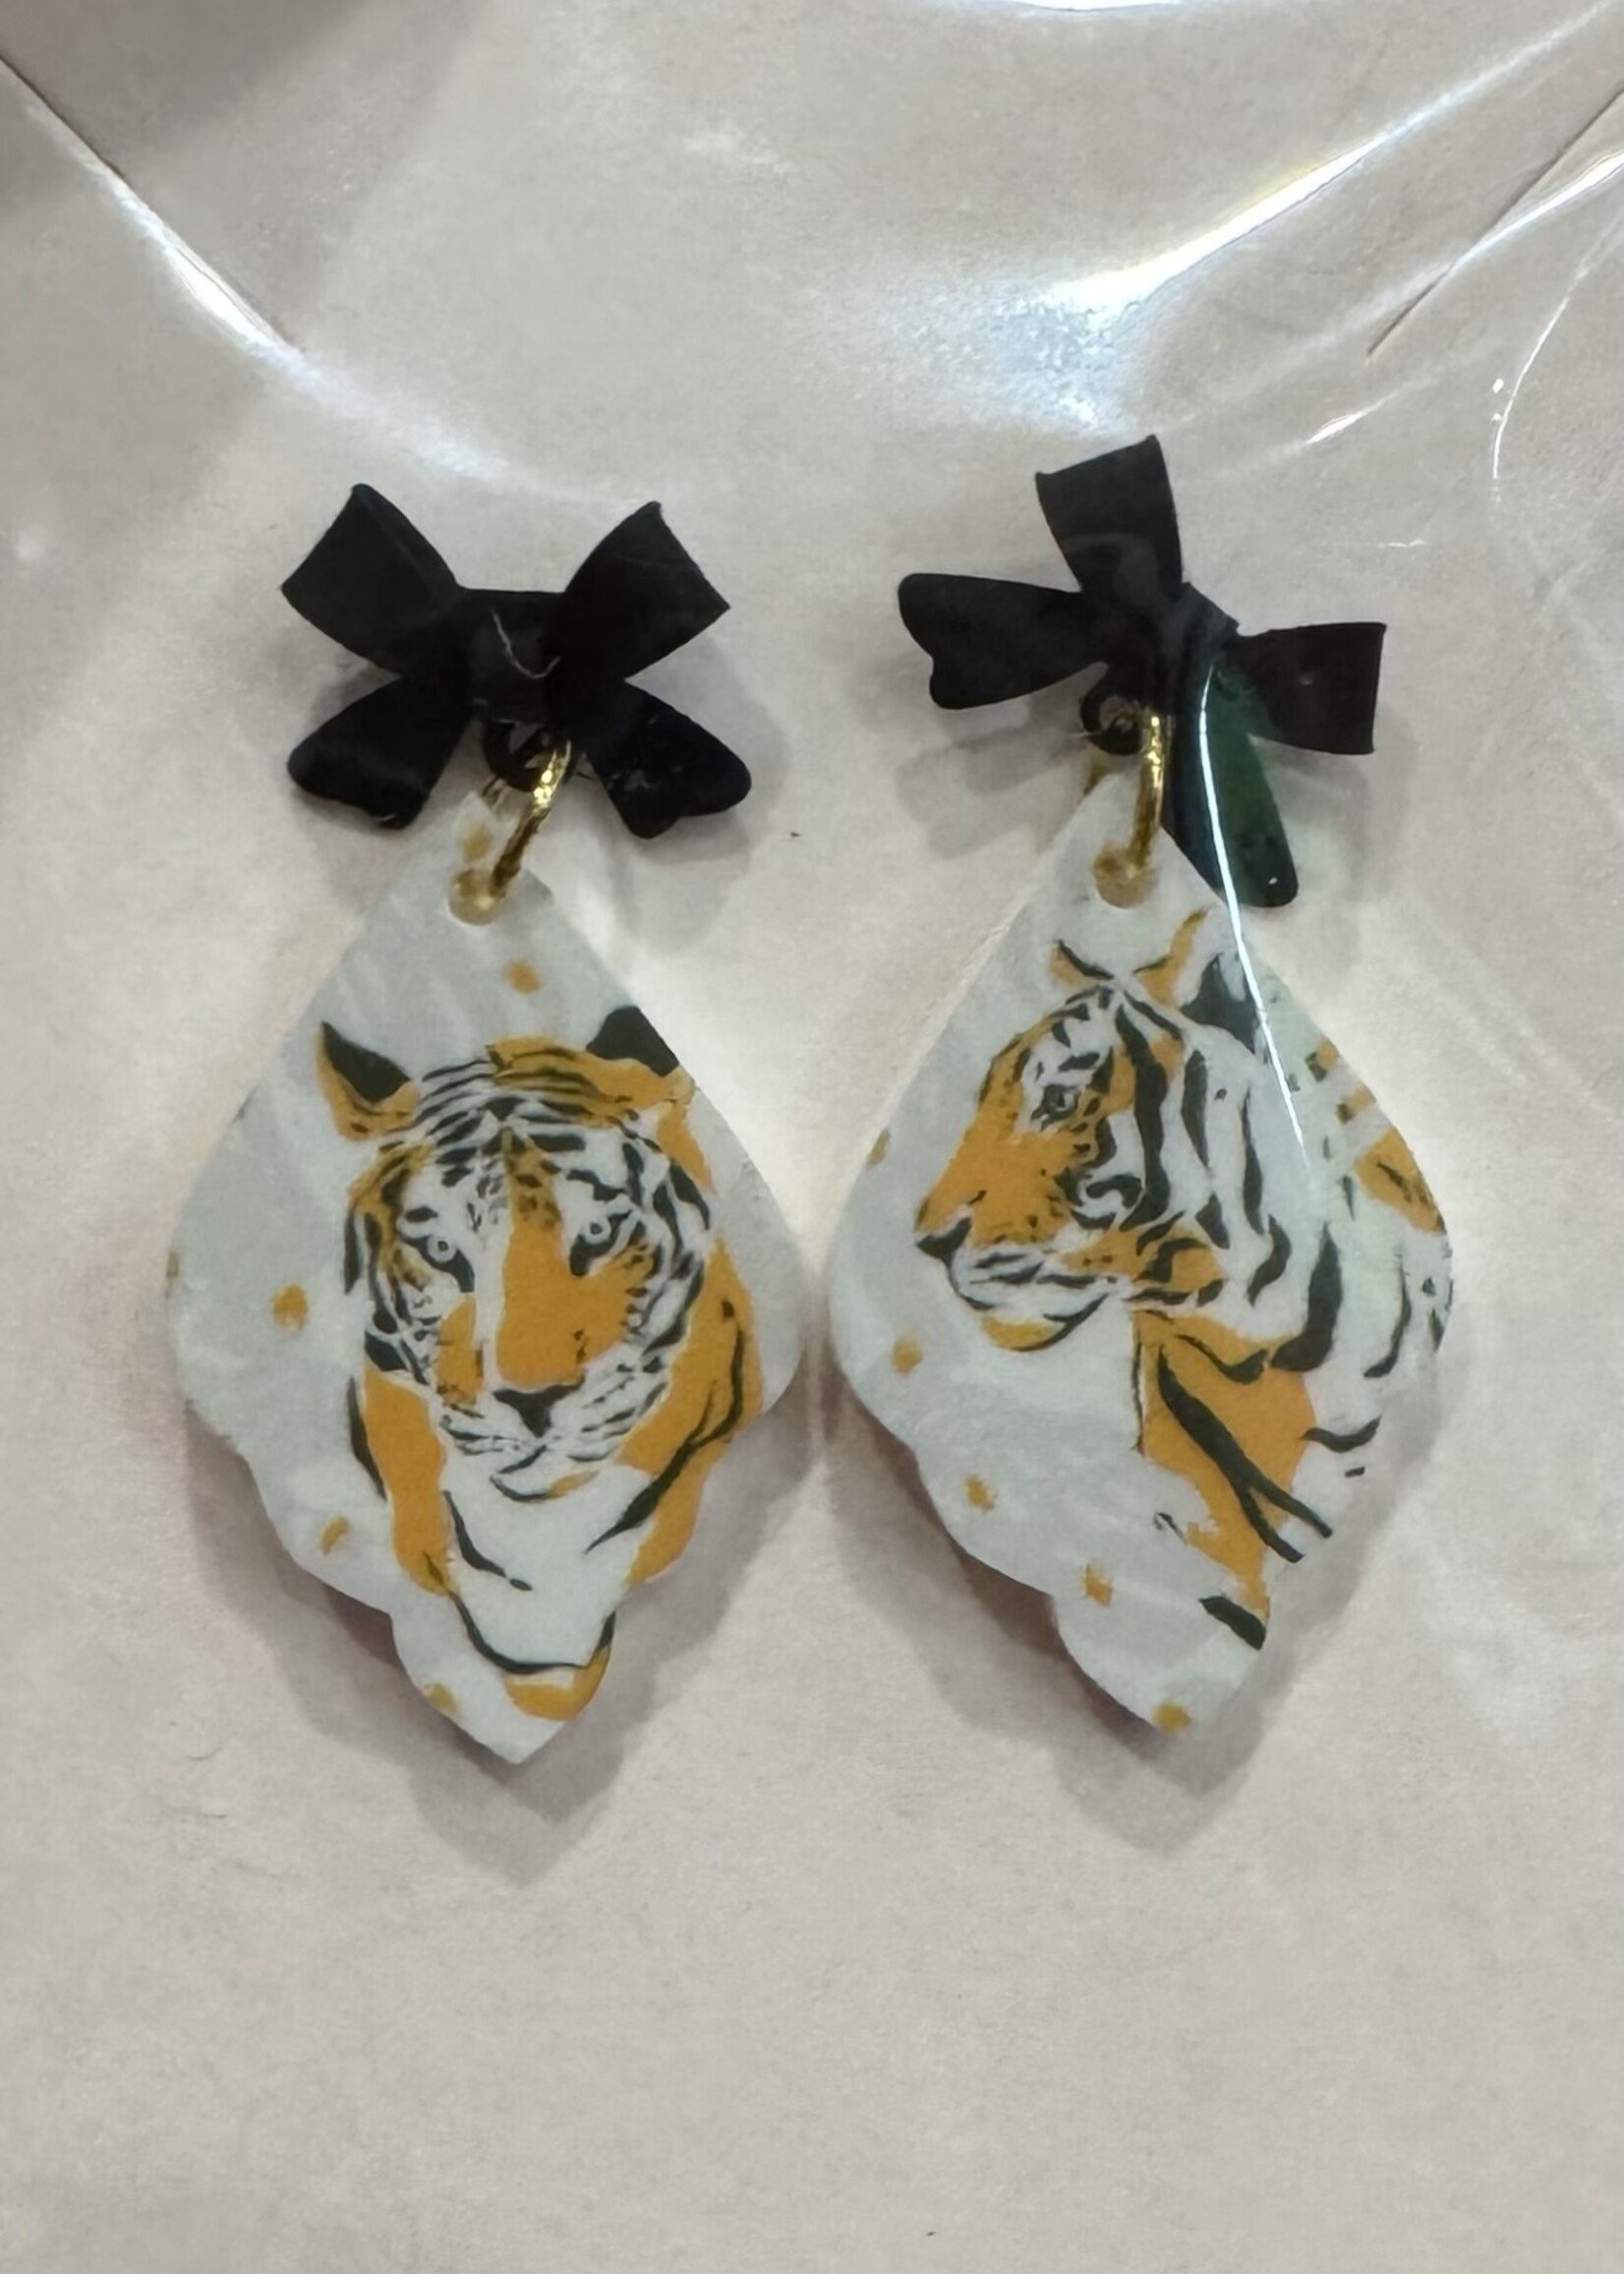 Tiger Earrings with bow